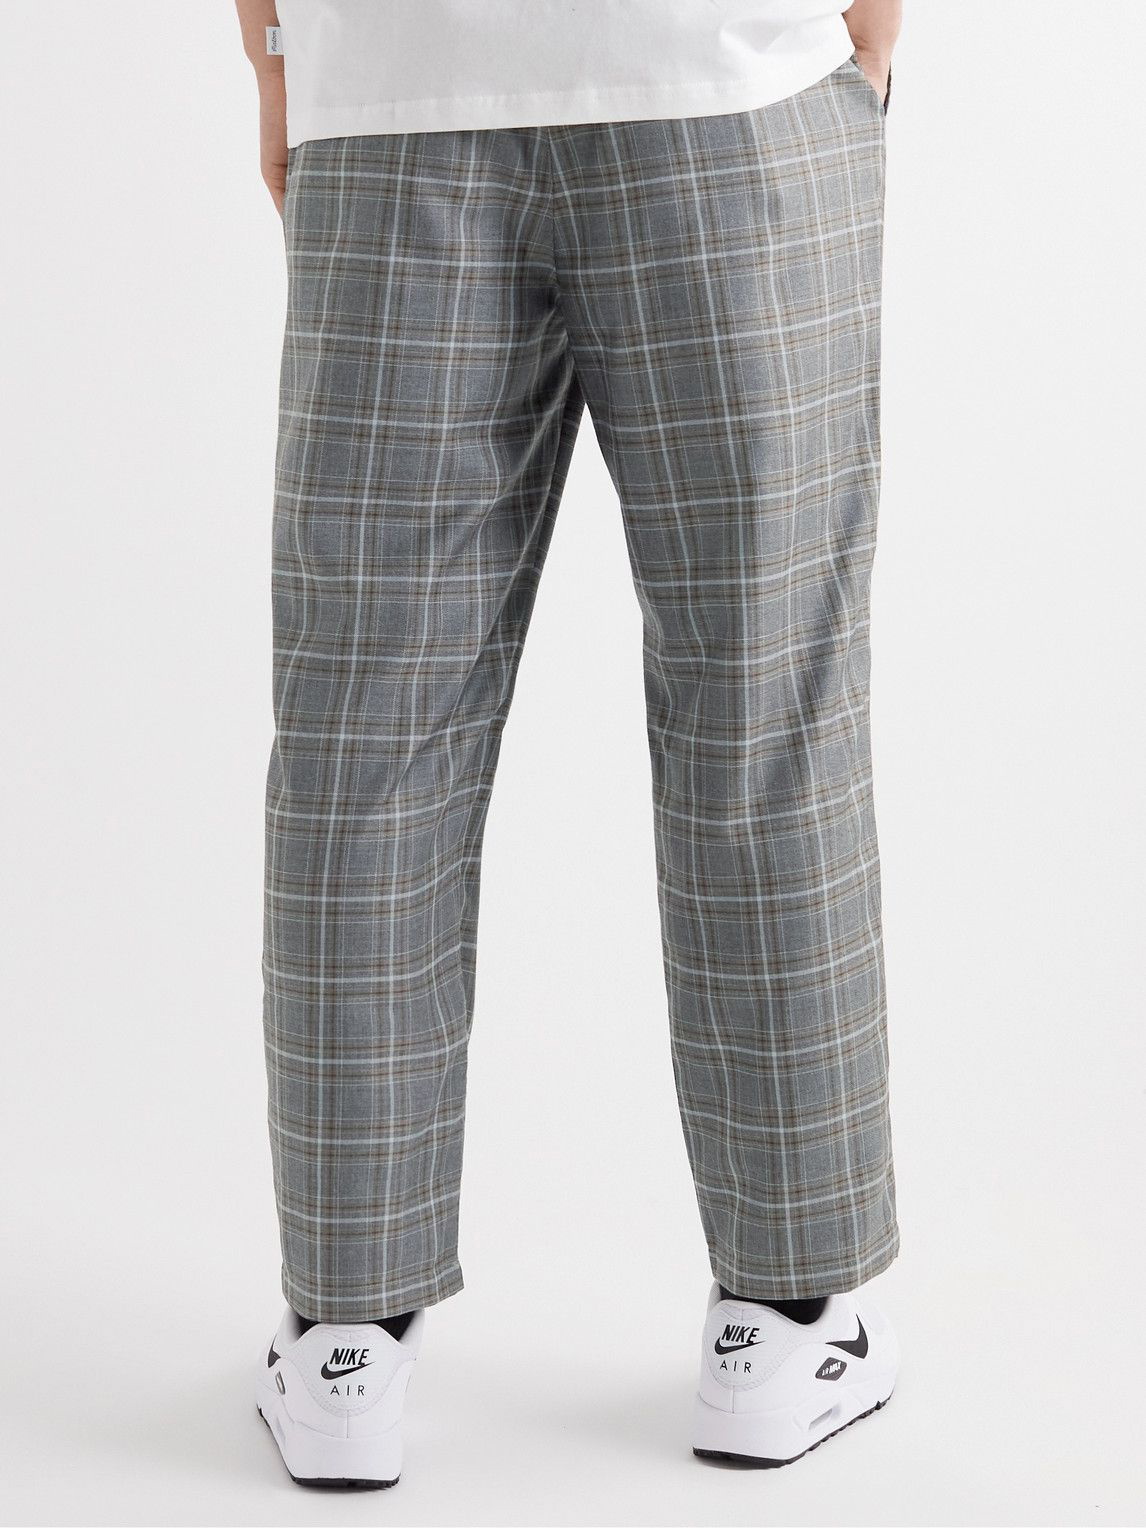 Loudmouth Golf Pants Mens - A-Tisket